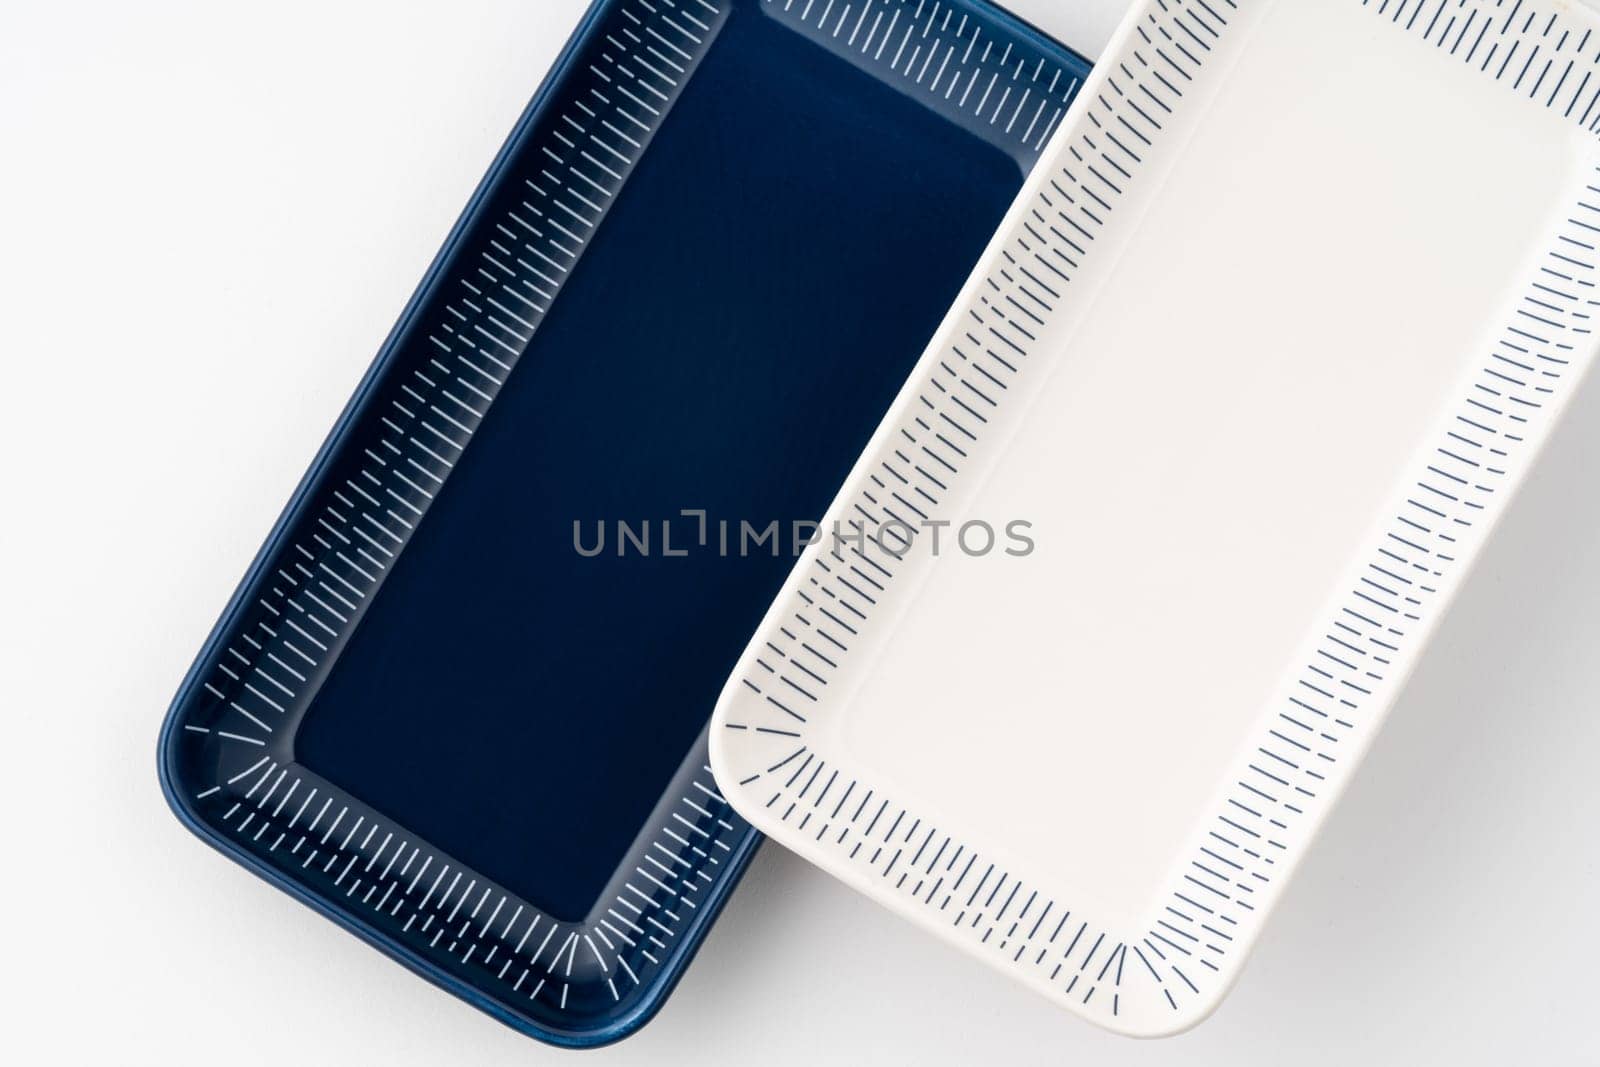 A set of blue and white luxury ceramic kitchen utensils on a white background